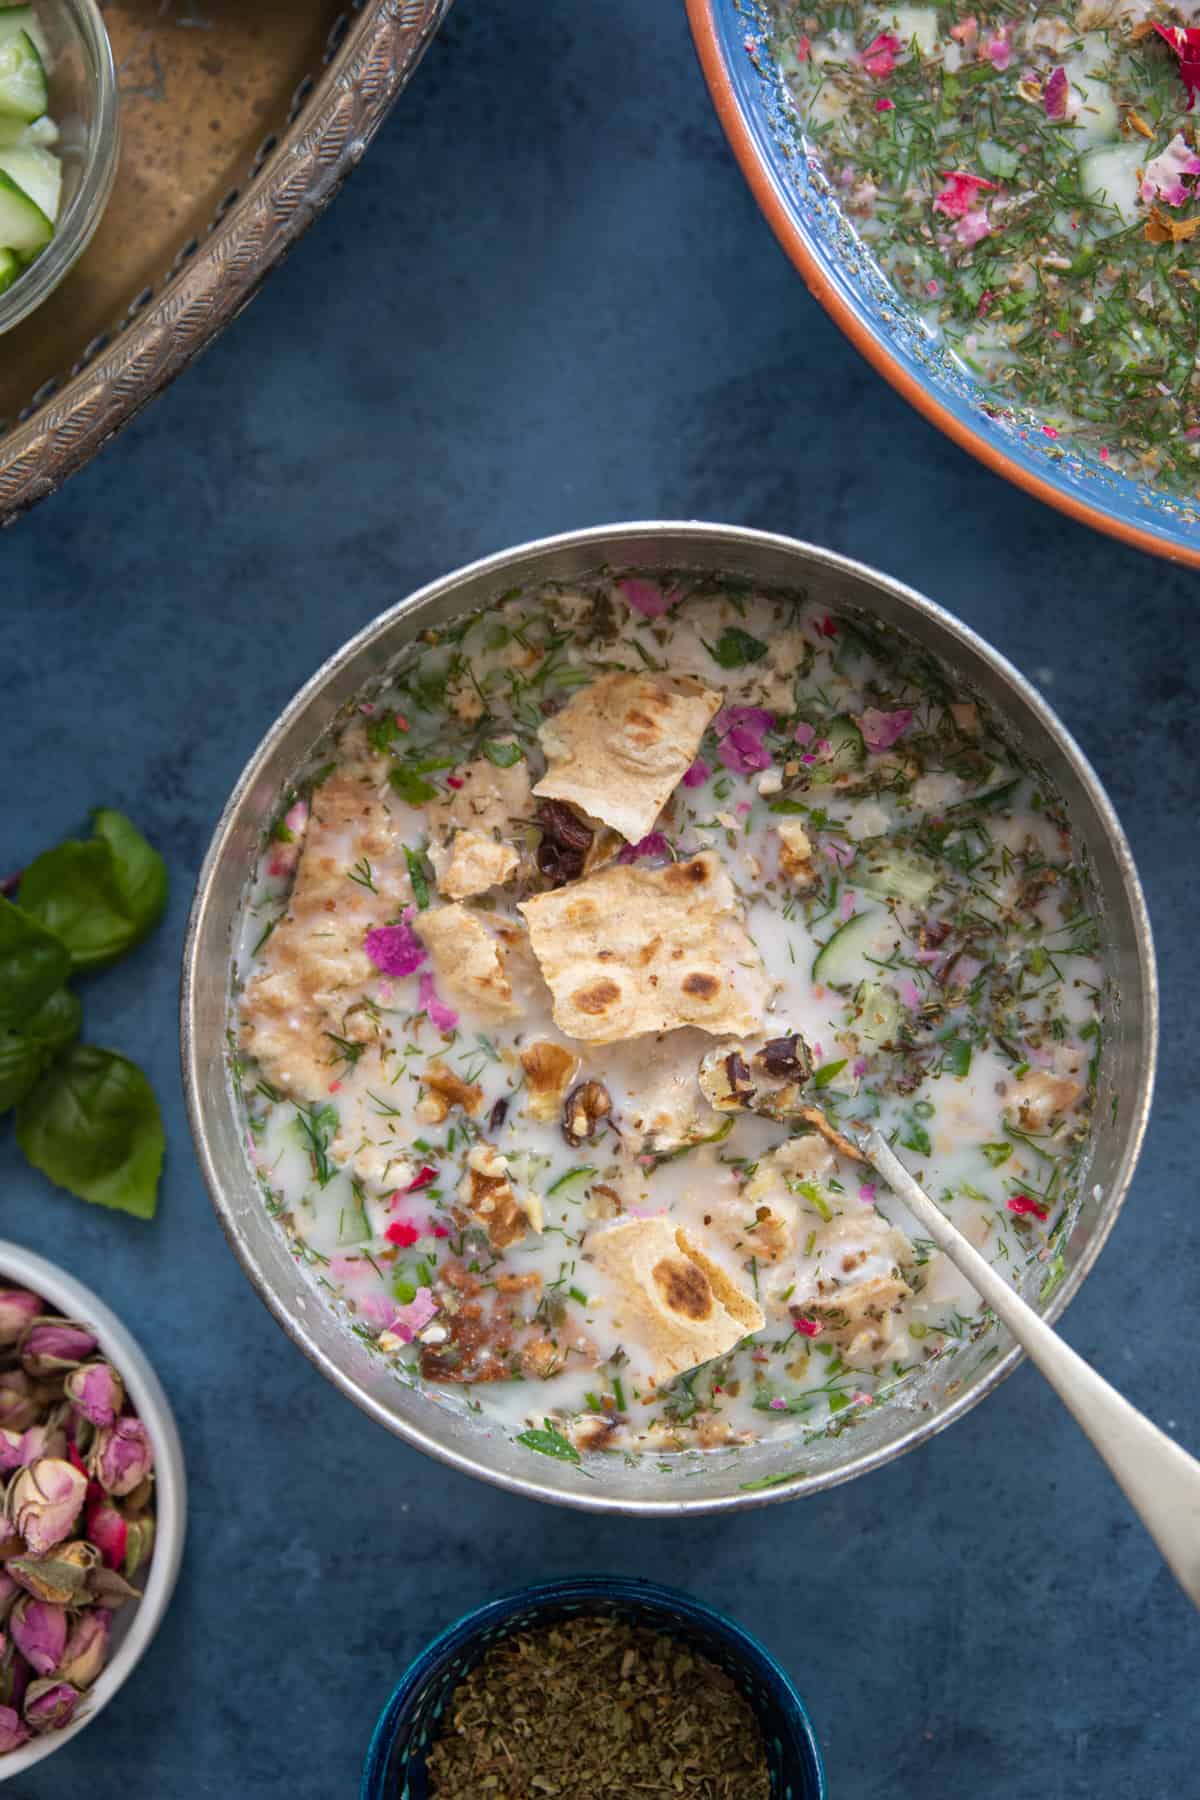 Stay cool this summer with this Persian Cold Yogurt Soup - Abdoogh Khiar. This tasty yogurt soup is made with simple, natural and healthy ingredients and is ready in only 15 minutes.